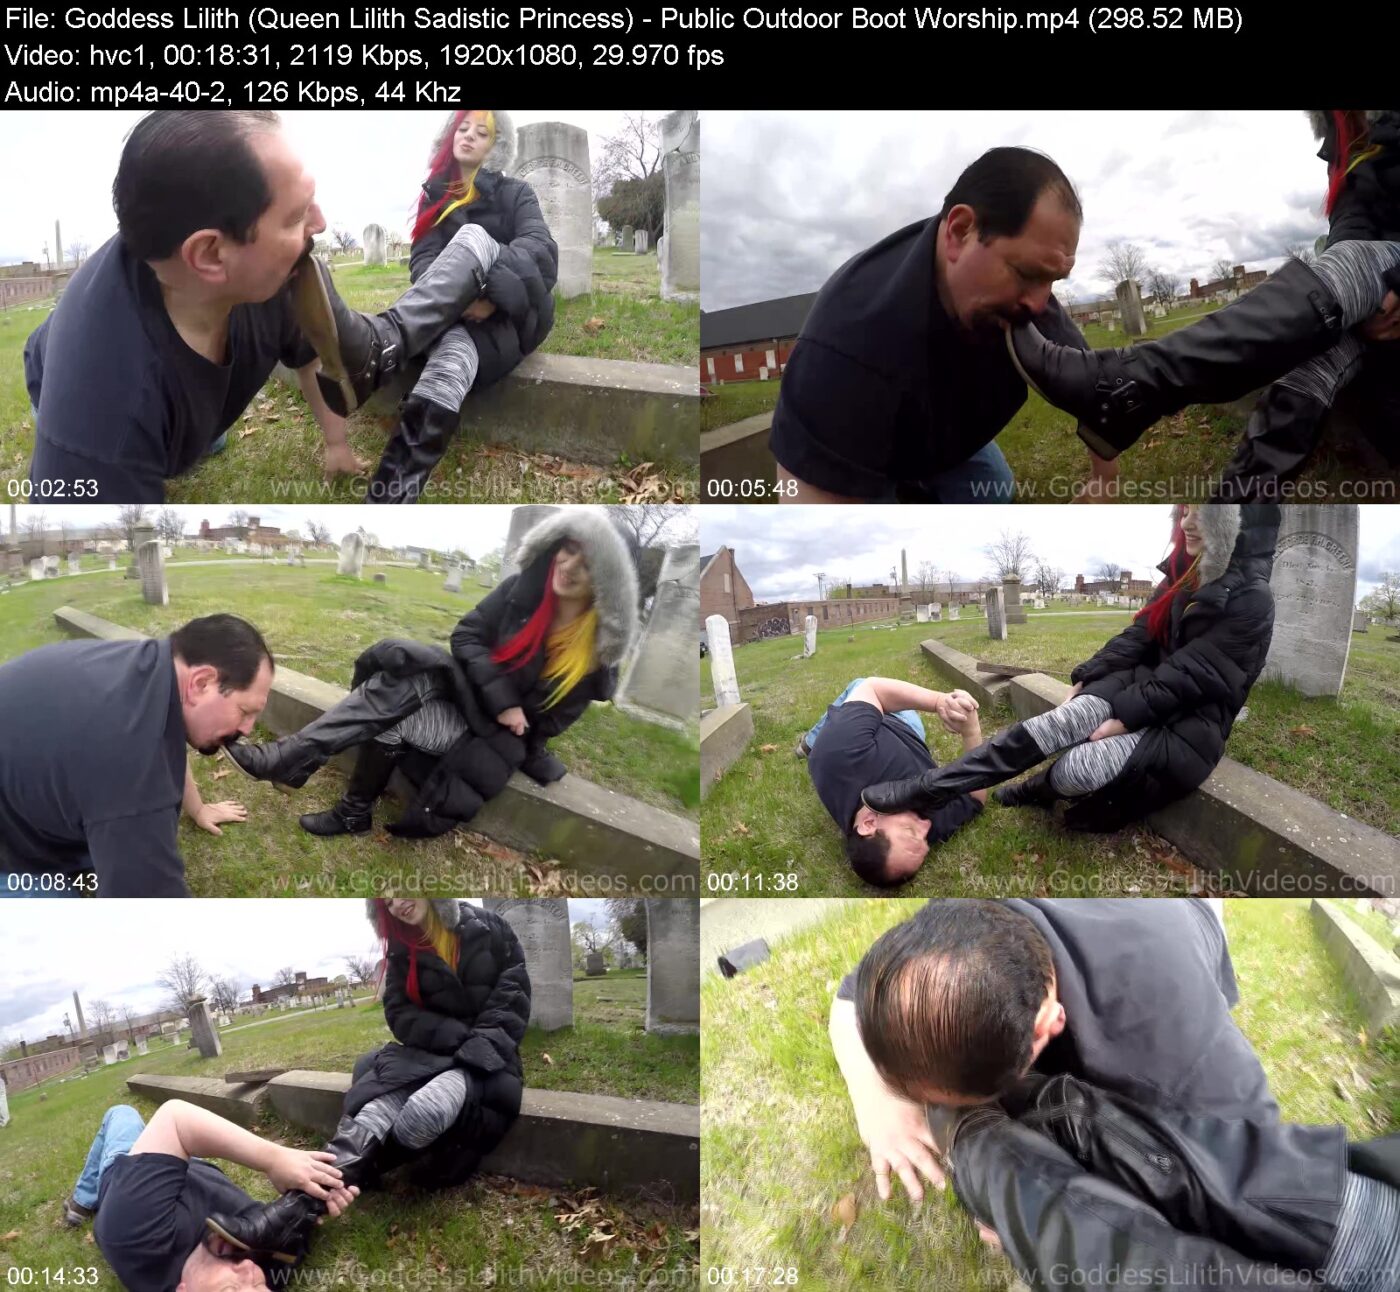 Actress: Goddess Lilith (Queen Lilith Sadistic Princess). Title and Studio: Public Outdoor Boot Worship